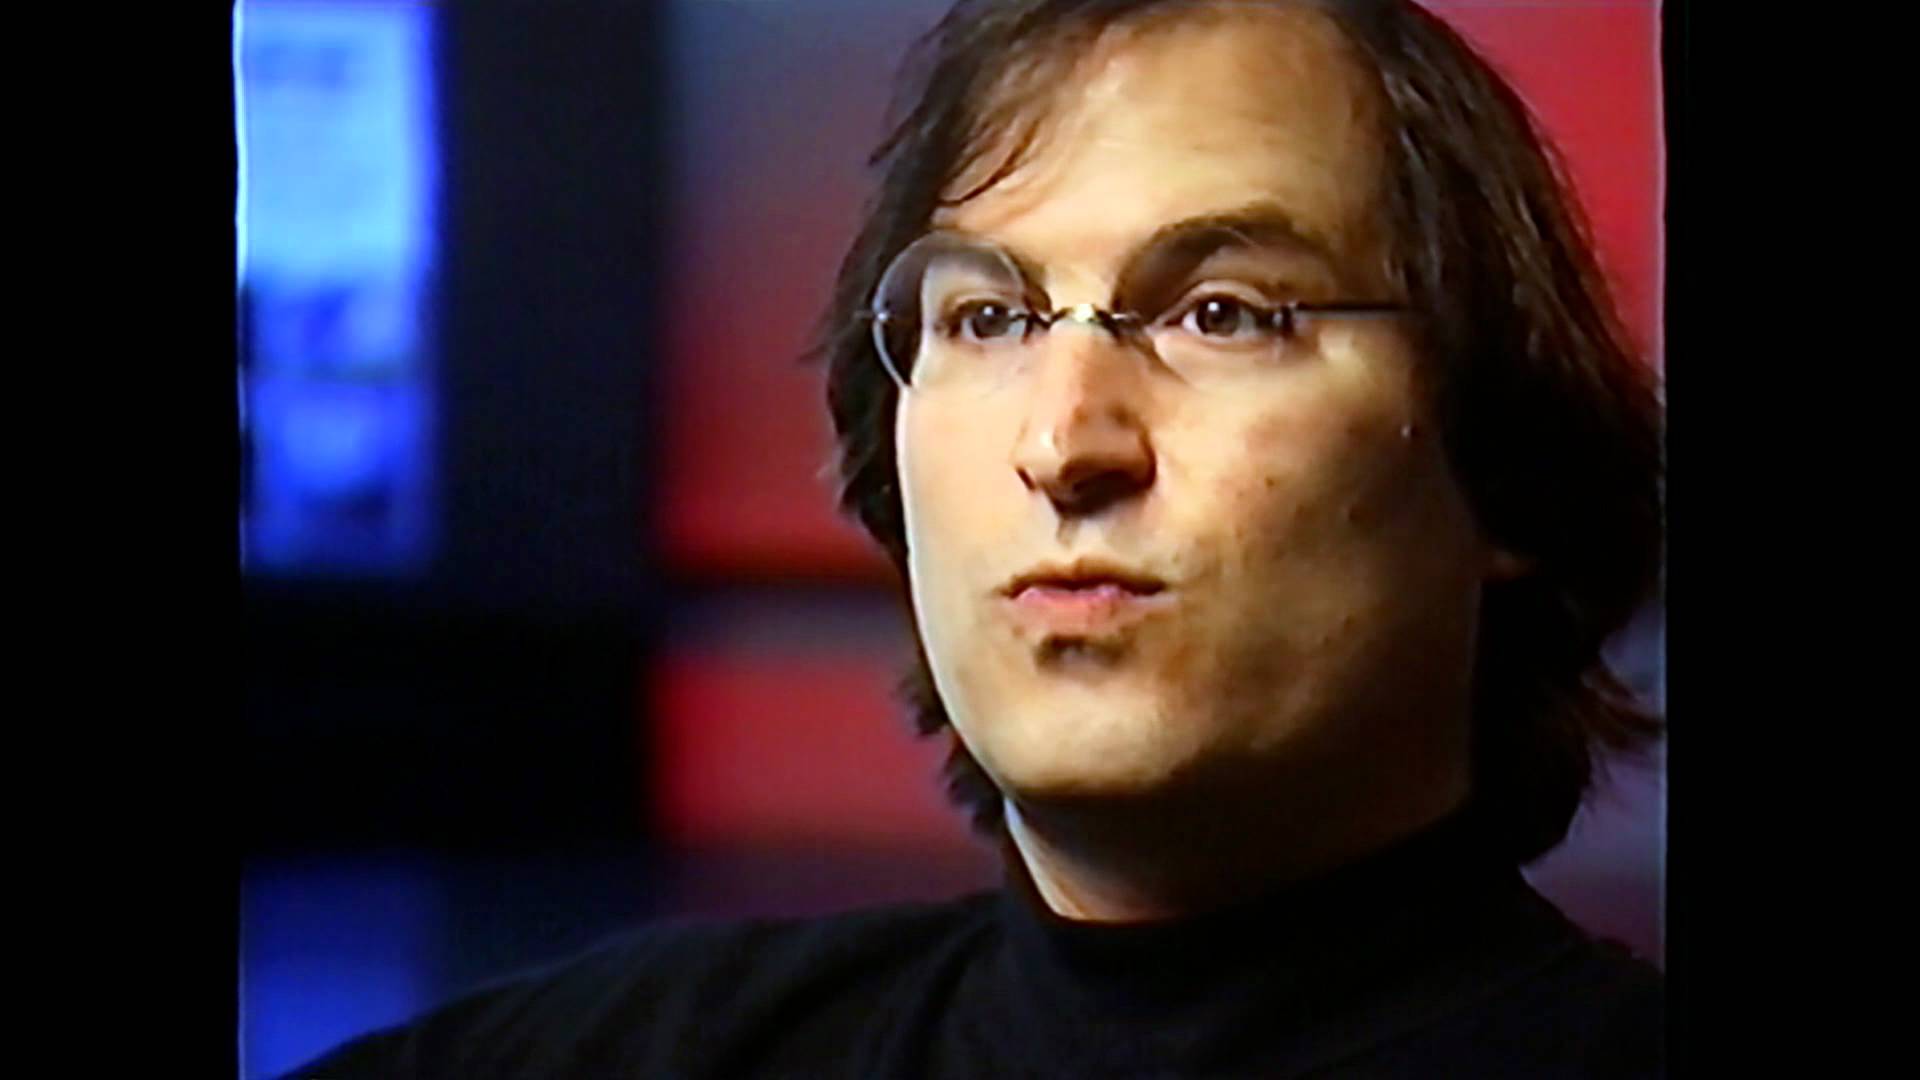 Cringely steve jobs lost interview